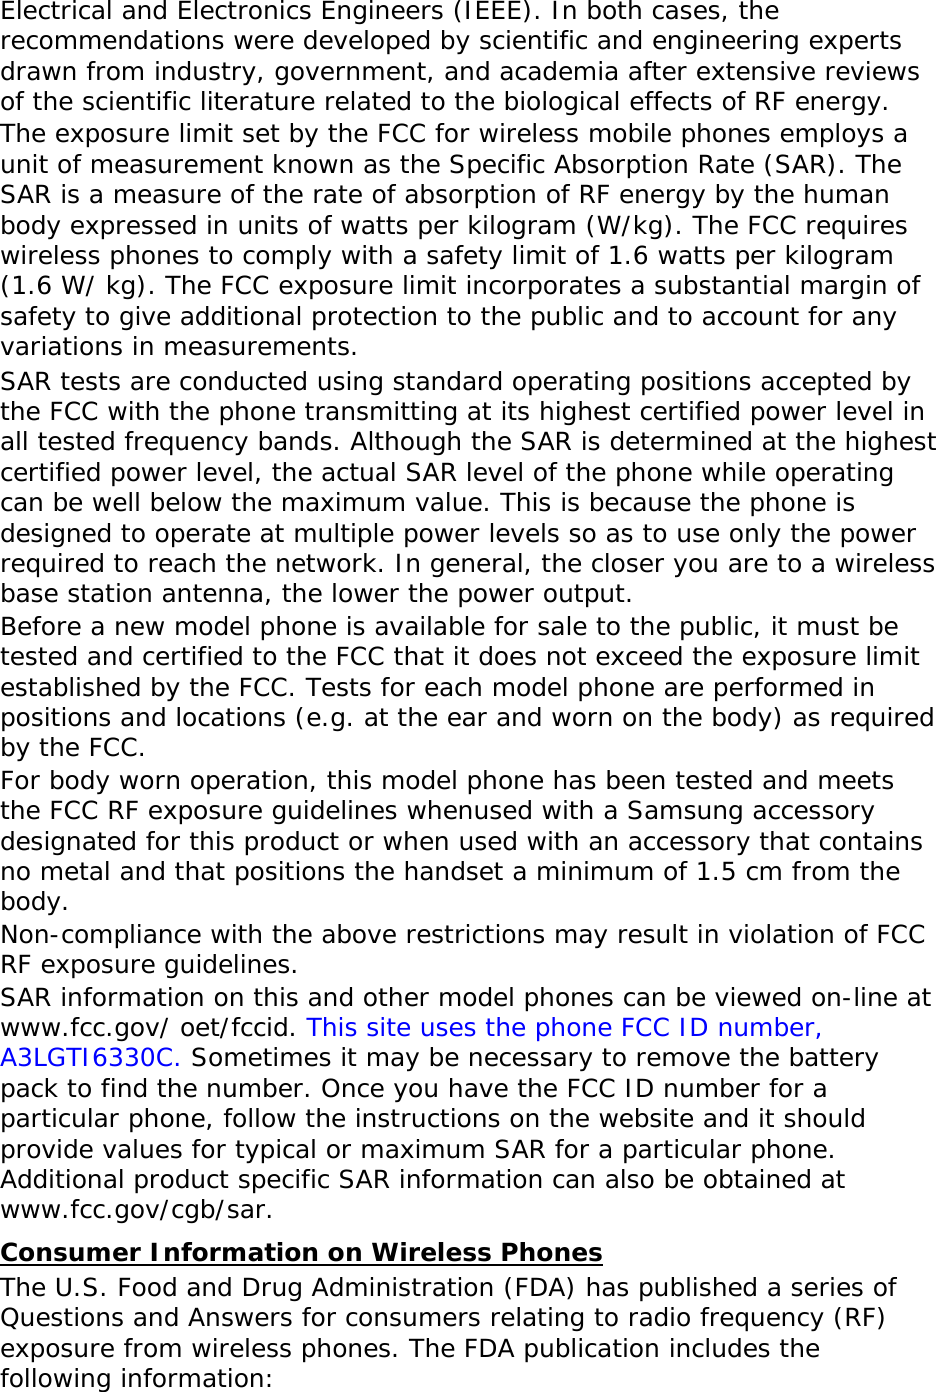  Electrical and Electronics Engineers (IEEE). In both cases, the recommendations were developed by scientific and engineering experts drawn from industry, government, and academia after extensive reviews of the scientific literature related to the biological effects of RF energy. The exposure limit set by the FCC for wireless mobile phones employs a unit of measurement known as the Specific Absorption Rate (SAR). The SAR is a measure of the rate of absorption of RF energy by the human body expressed in units of watts per kilogram (W/kg). The FCC requires wireless phones to comply with a safety limit of 1.6 watts per kilogram (1.6 W/ kg). The FCC exposure limit incorporates a substantial margin of safety to give additional protection to the public and to account for any variations in measurements. SAR tests are conducted using standard operating positions accepted by the FCC with the phone transmitting at its highest certified power level in all tested frequency bands. Although the SAR is determined at the highest certified power level, the actual SAR level of the phone while operating can be well below the maximum value. This is because the phone is designed to operate at multiple power levels so as to use only the power required to reach the network. In general, the closer you are to a wireless base station antenna, the lower the power output. Before a new model phone is available for sale to the public, it must be tested and certified to the FCC that it does not exceed the exposure limit established by the FCC. Tests for each model phone are performed in positions and locations (e.g. at the ear and worn on the body) as required by the FCC.   For body worn operation, this model phone has been tested and meets the FCC RF exposure guidelines whenused with a Samsung accessory designated for this product or when used with an accessory that contains no metal and that positions the handset a minimum of 1.5 cm from the body.  Non-compliance with the above restrictions may result in violation of FCC RF exposure guidelines. SAR information on this and other model phones can be viewed on-line at www.fcc.gov/ oet/fccid. This site uses the phone FCC ID number, A3LGTI6330C. Sometimes it may be necessary to remove the battery pack to find the number. Once you have the FCC ID number for a particular phone, follow the instructions on the website and it should provide values for typical or maximum SAR for a particular phone. Additional product specific SAR information can also be obtained at www.fcc.gov/cgb/sar. Consumer Information on Wireless Phones The U.S. Food and Drug Administration (FDA) has published a series of Questions and Answers for consumers relating to radio frequency (RF) exposure from wireless phones. The FDA publication includes the following information:  